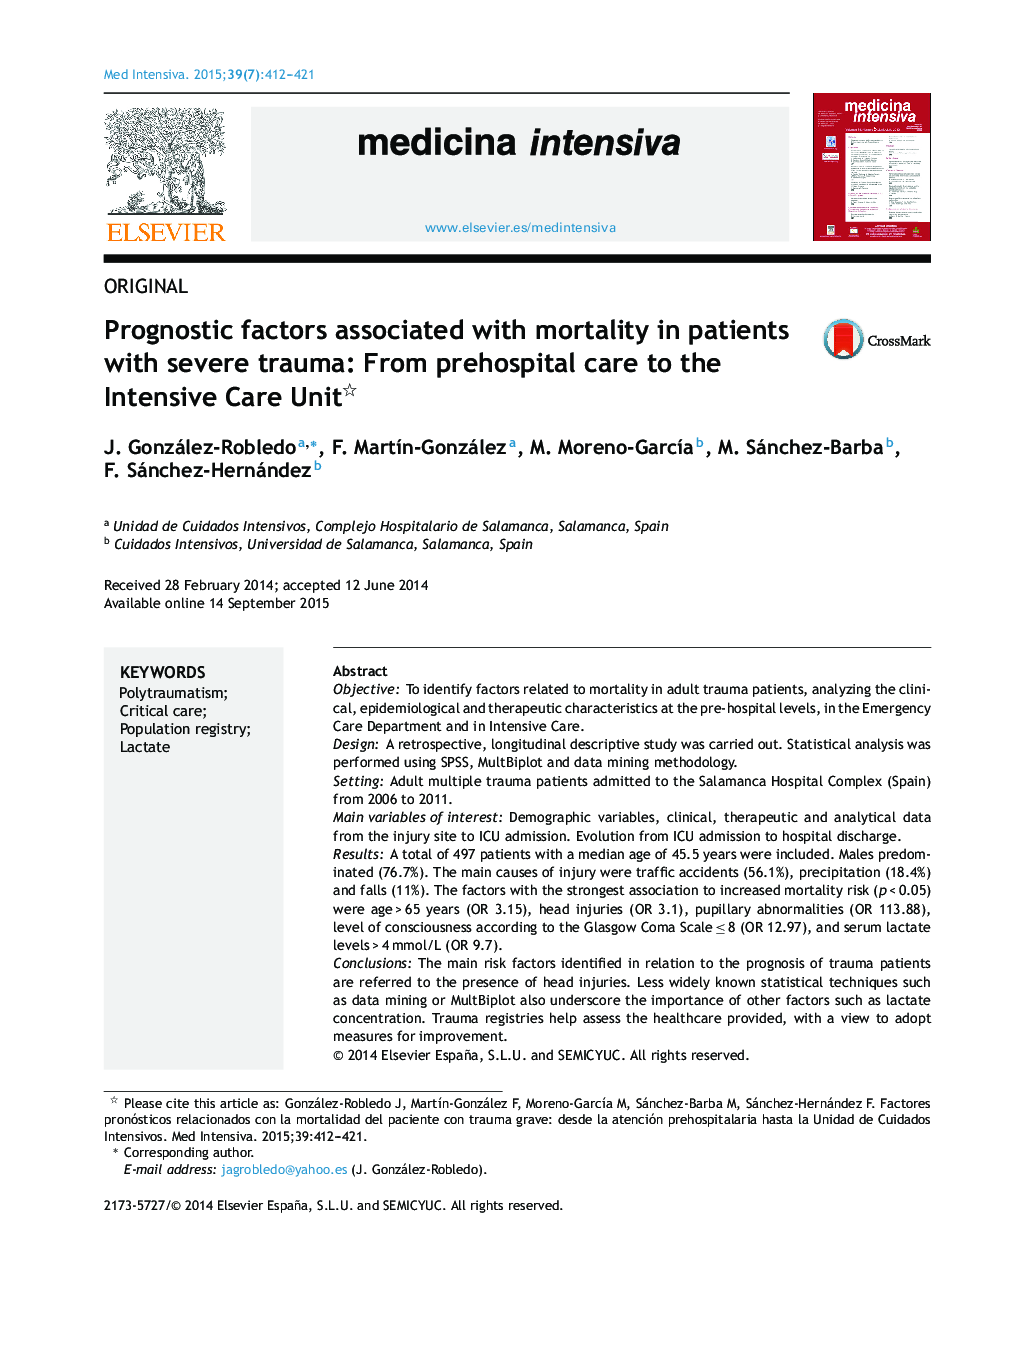 Prognostic factors associated with mortality in patients with severe trauma: From prehospital care to the Intensive Care Unit 